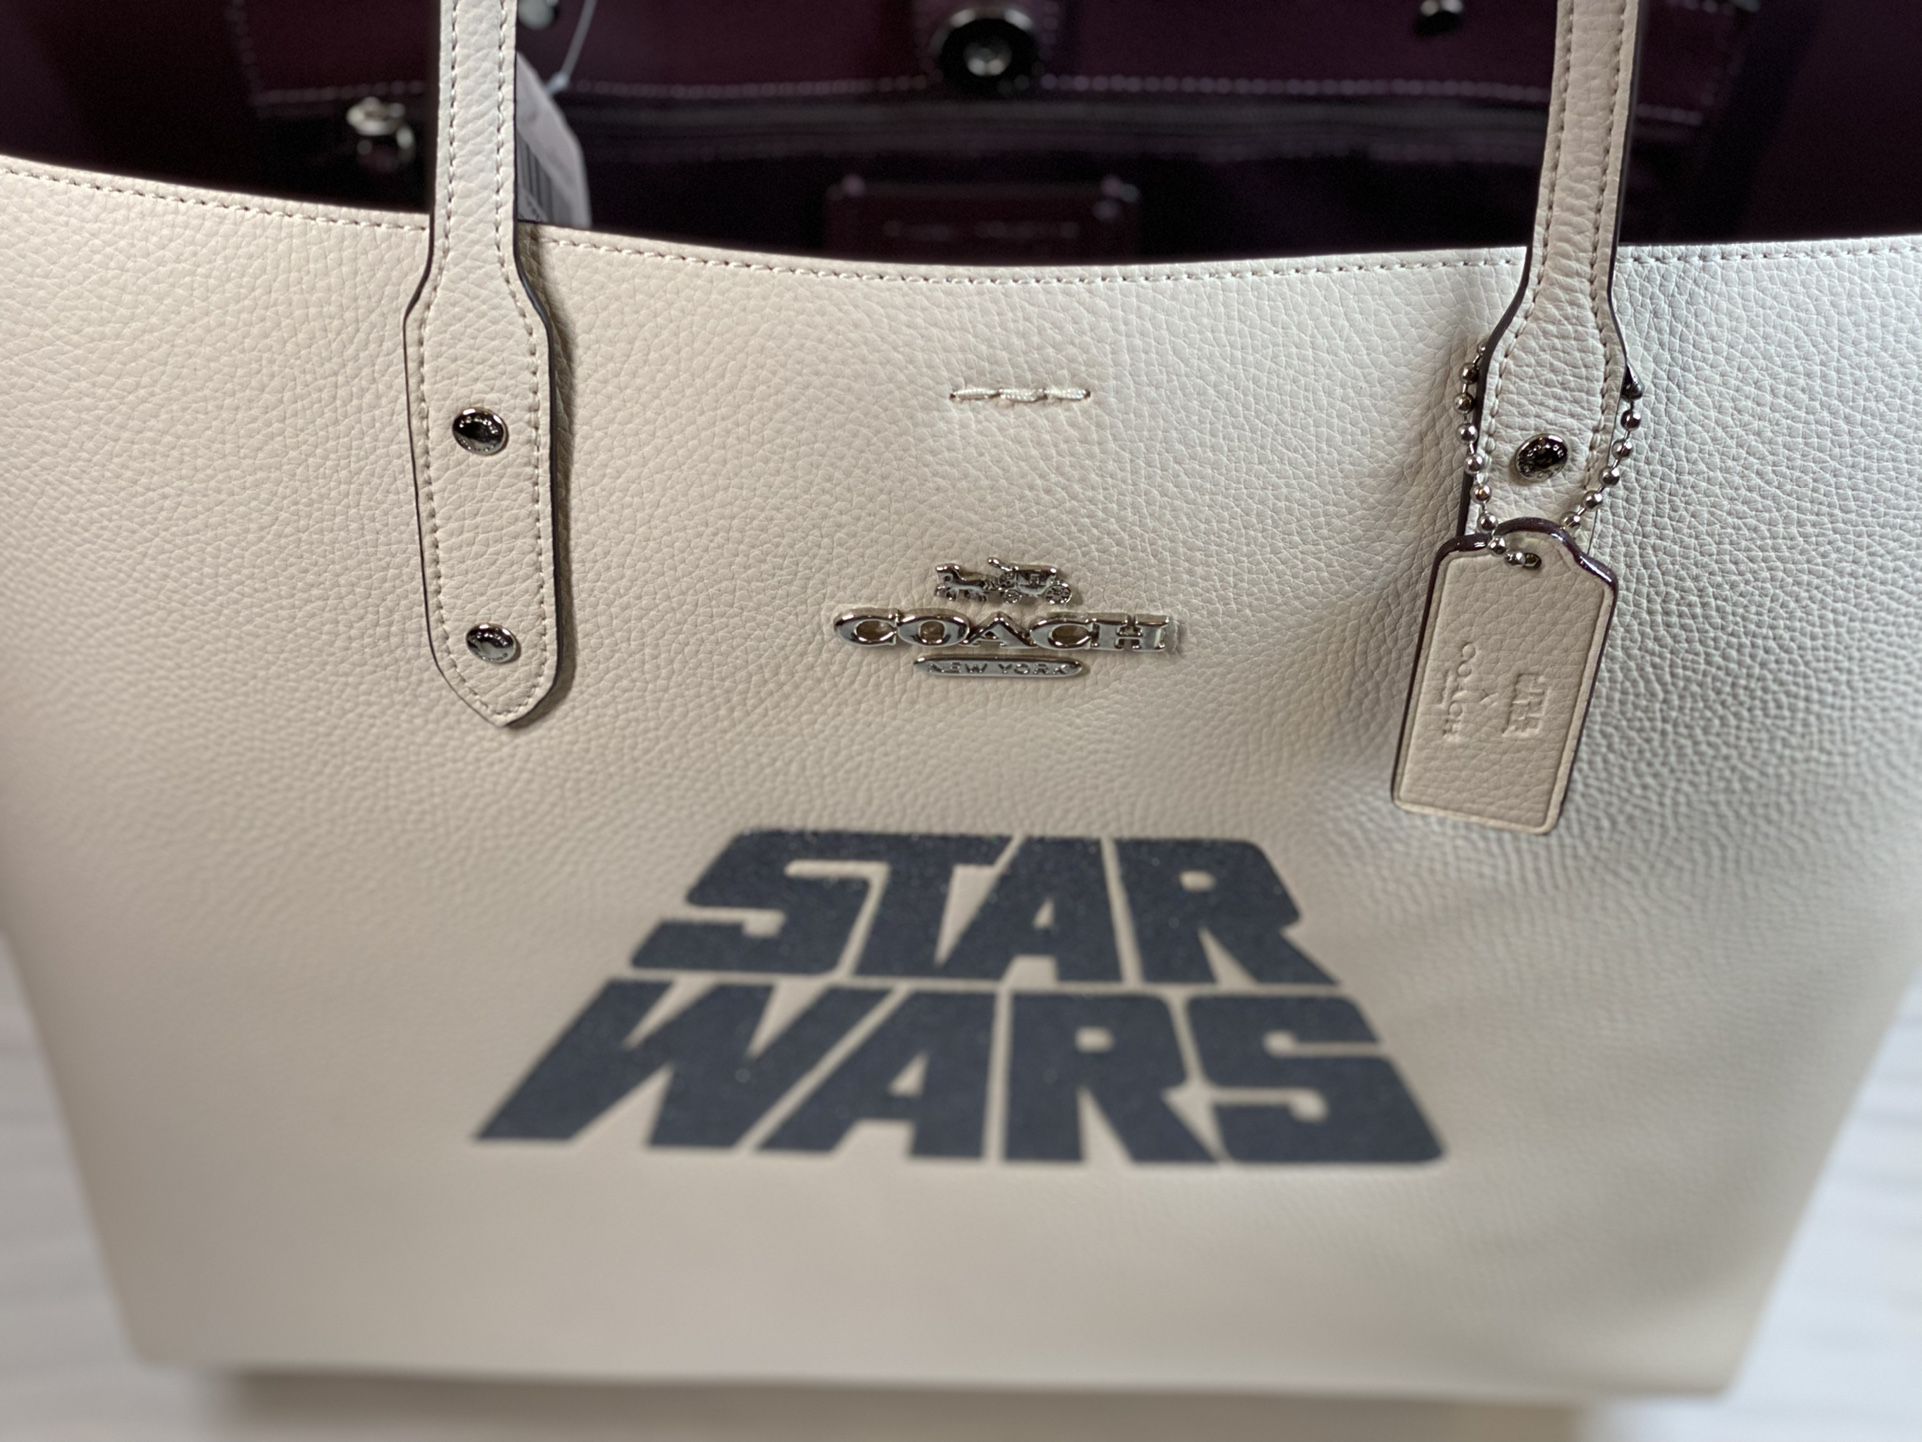 NWT Authentic Coach Collectible Limited Edition Star Wars Large Tote  W/ Complimentary Coach Box, Tissue & Bag - MSRP:$428 - $ALE FIRM Price:$175